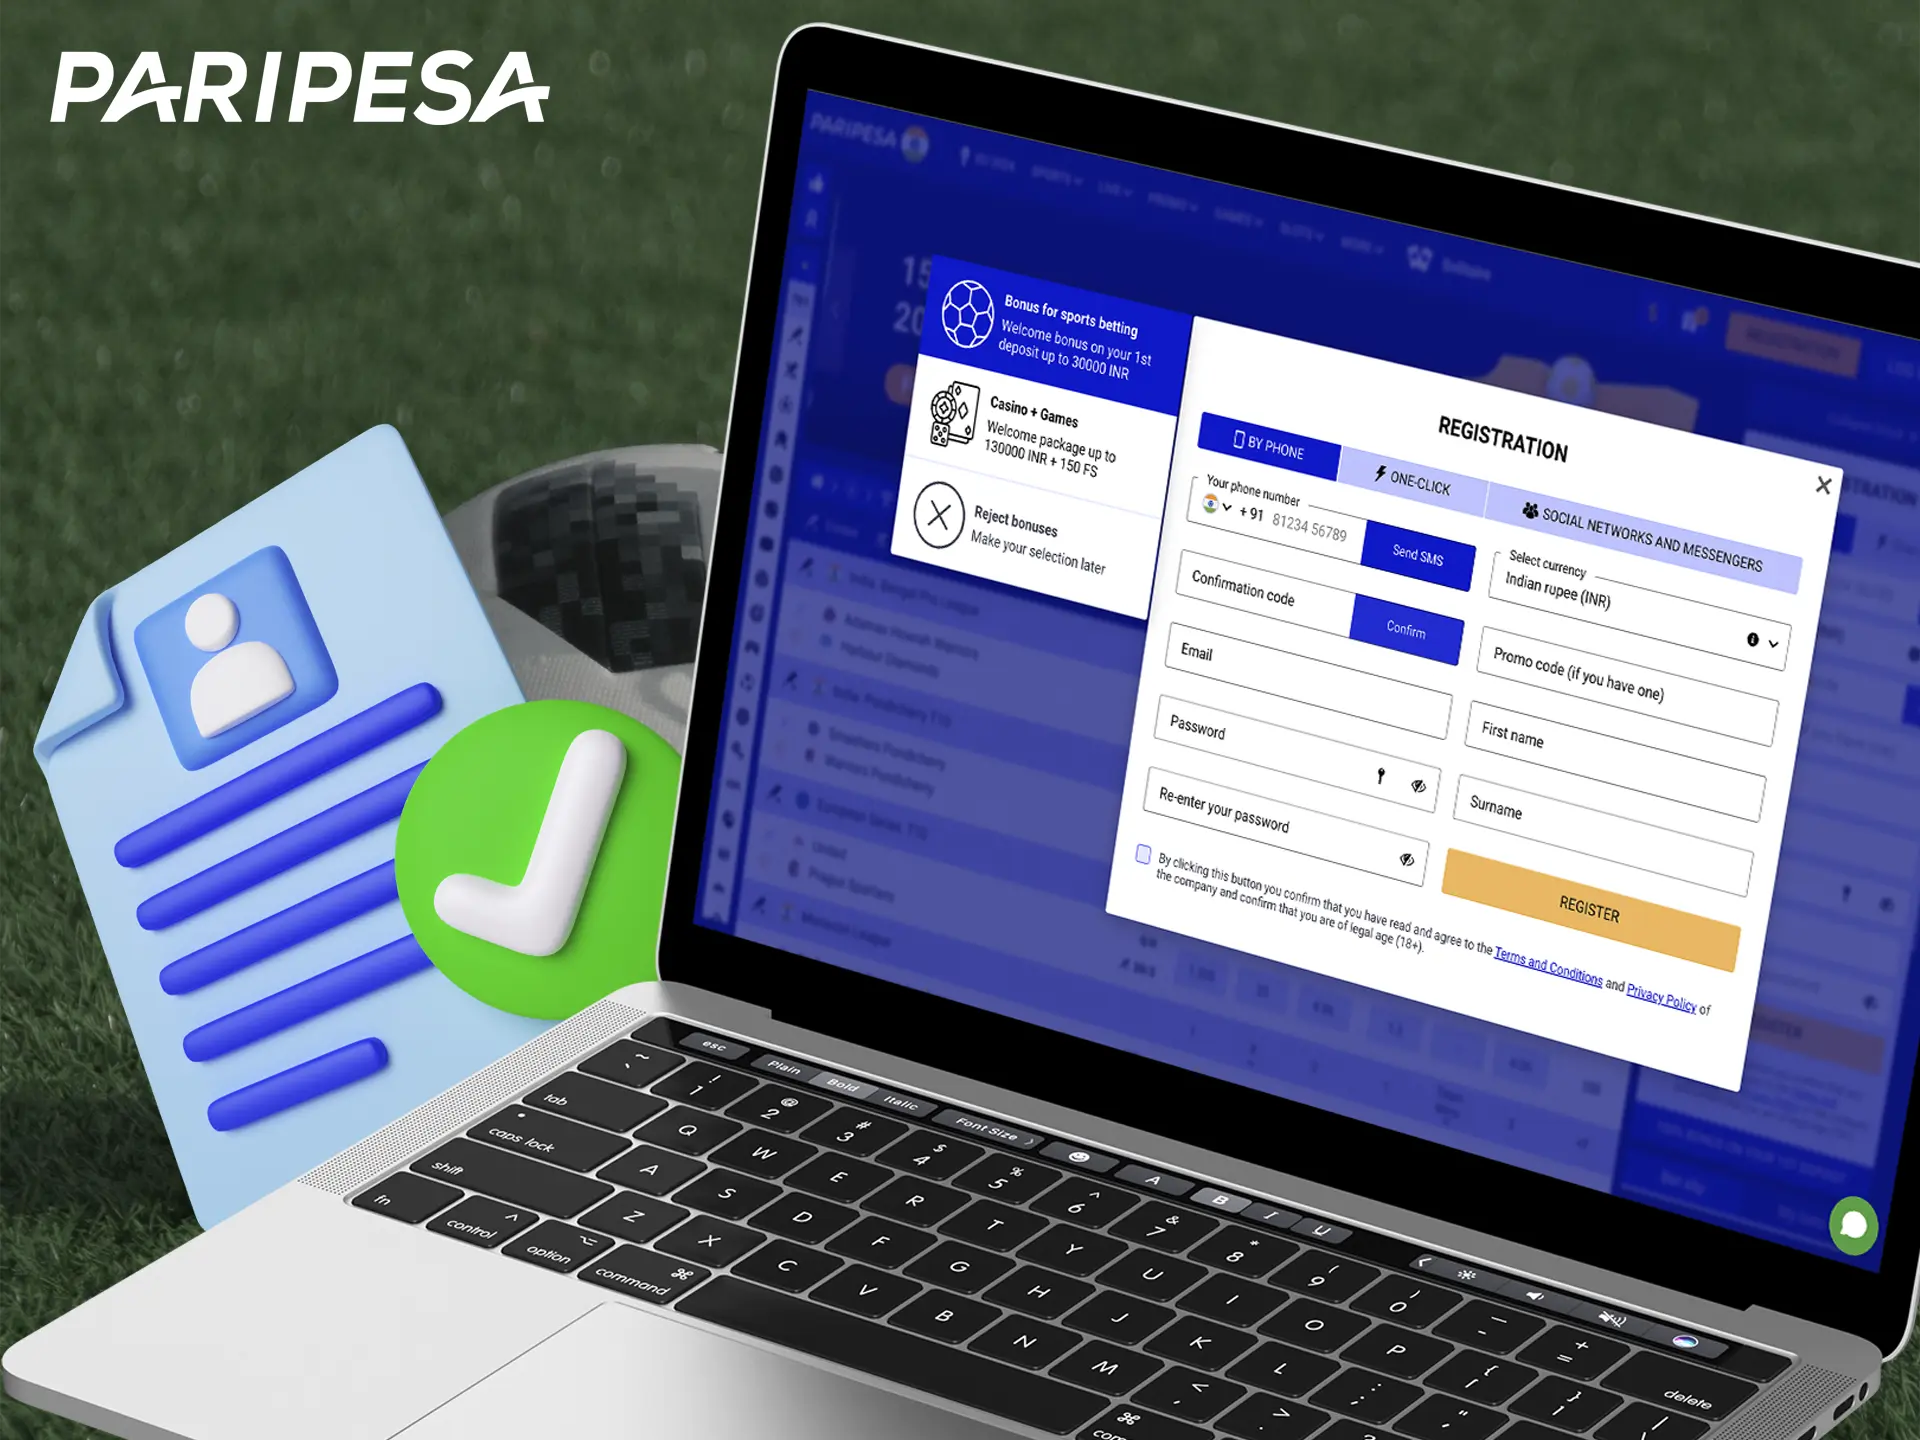 To fully immerse yourself in the world of betting you need to complete a simple registration at Paripesa.